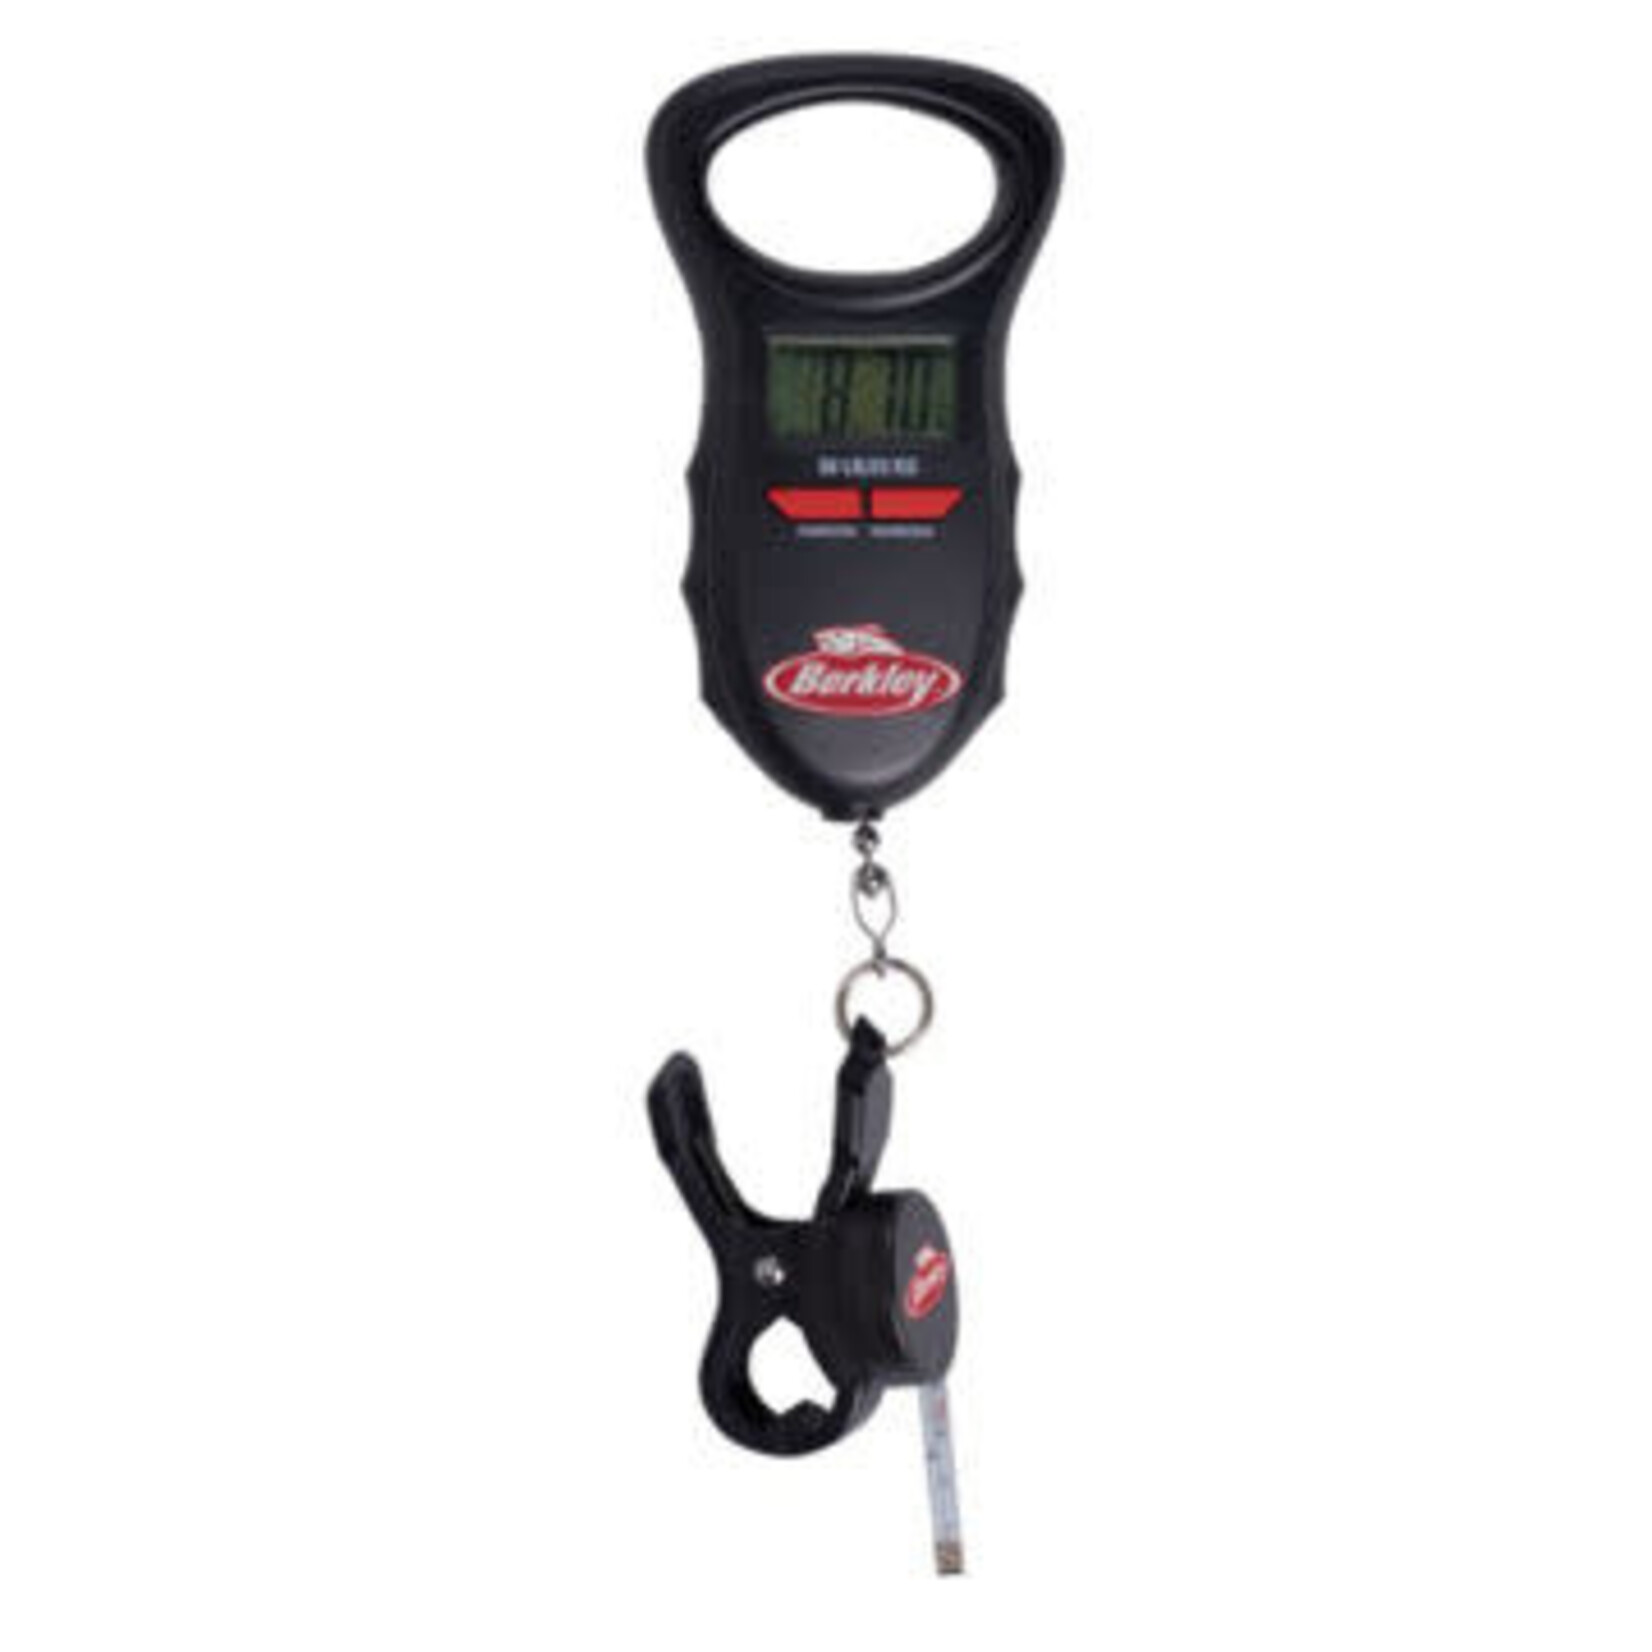 PURE FISHING Berkley® 50# Digital Fish Scale with 48"" Tape Stores 10weights in memory